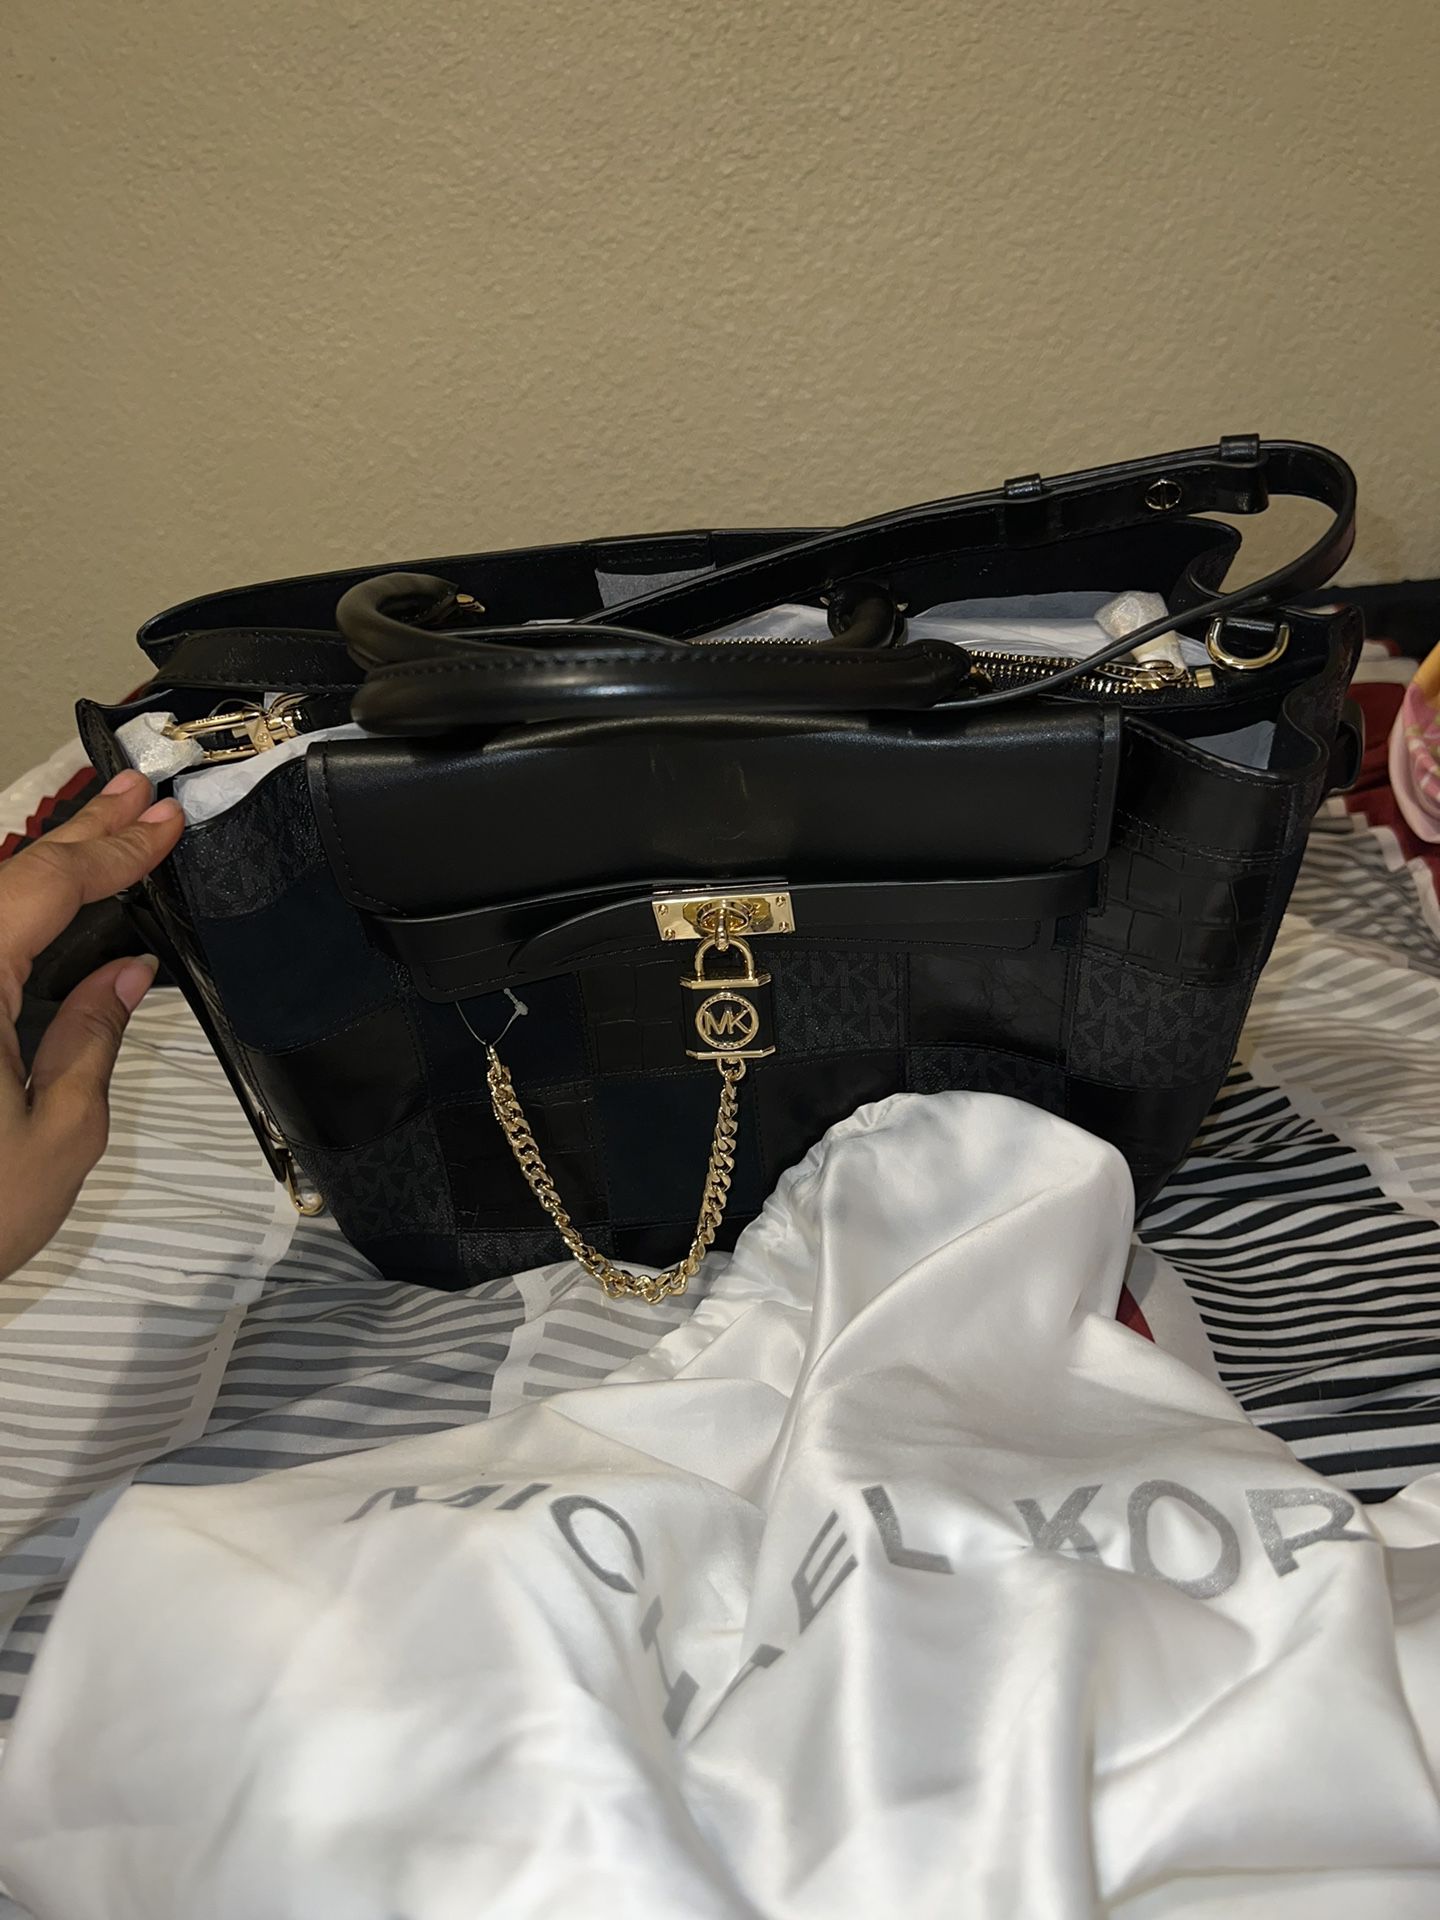 Michael kors for Sale in Albuquerque, NM - OfferUp